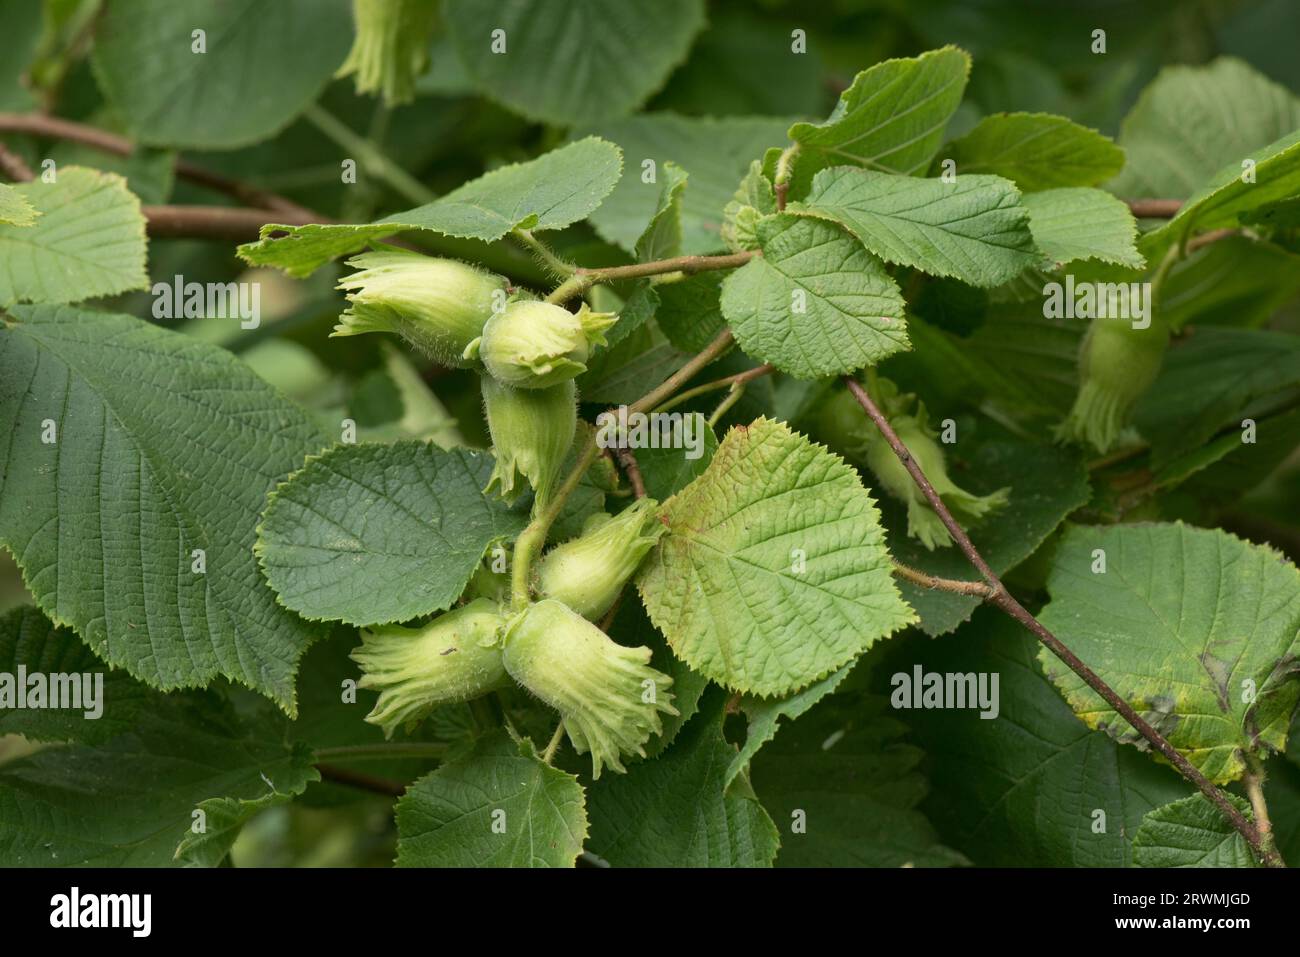 Young green hazel nuts or cob nuts (Corylus avellana) each fruit enclosed in a leafy involucre developing on a hazel bush in summer, Berkshire, July Stock Photo